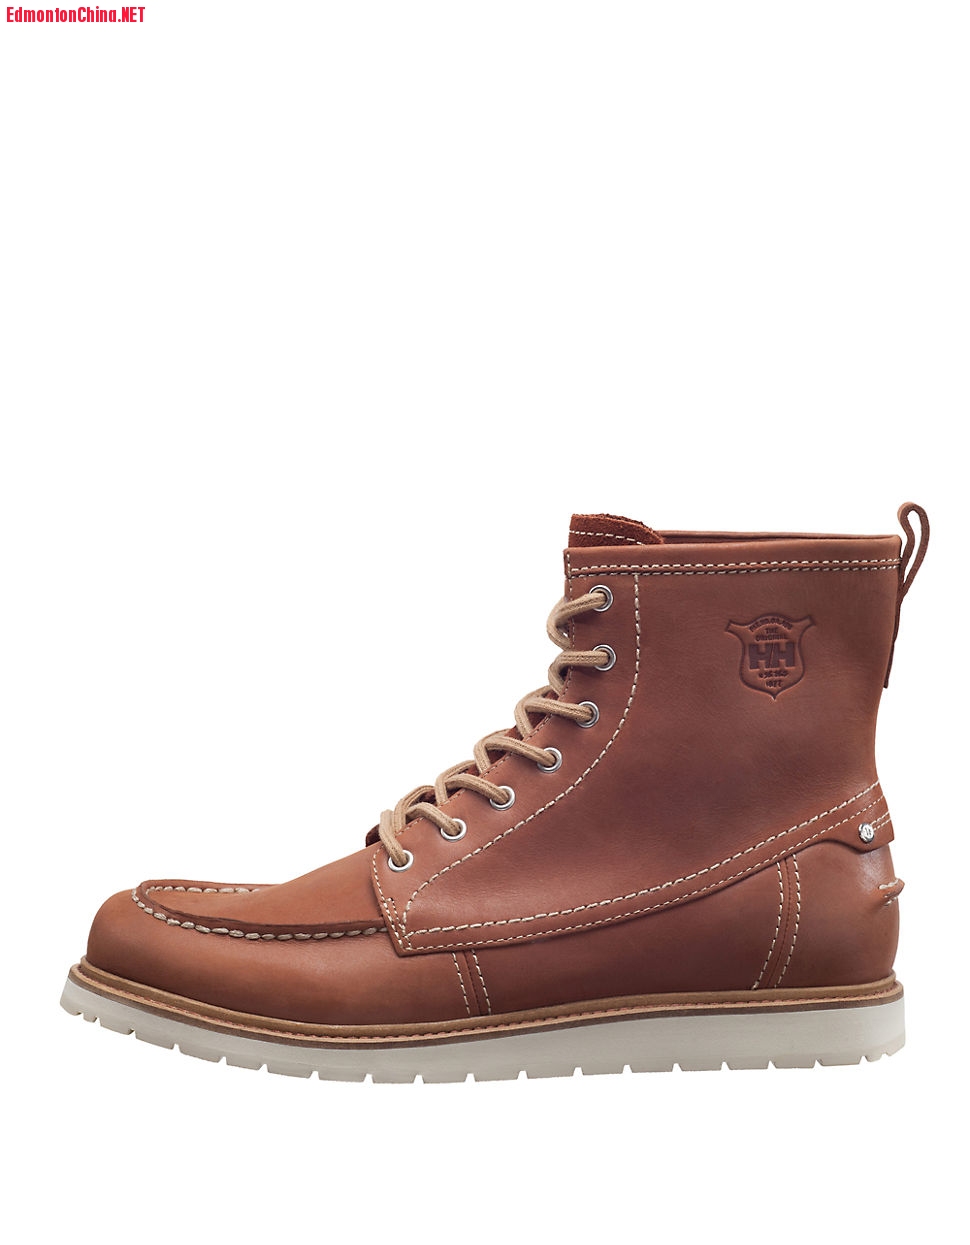 helly-hansen-dogwood-jaeger-leather-workboots-product-2-118778604-normal.jpeg